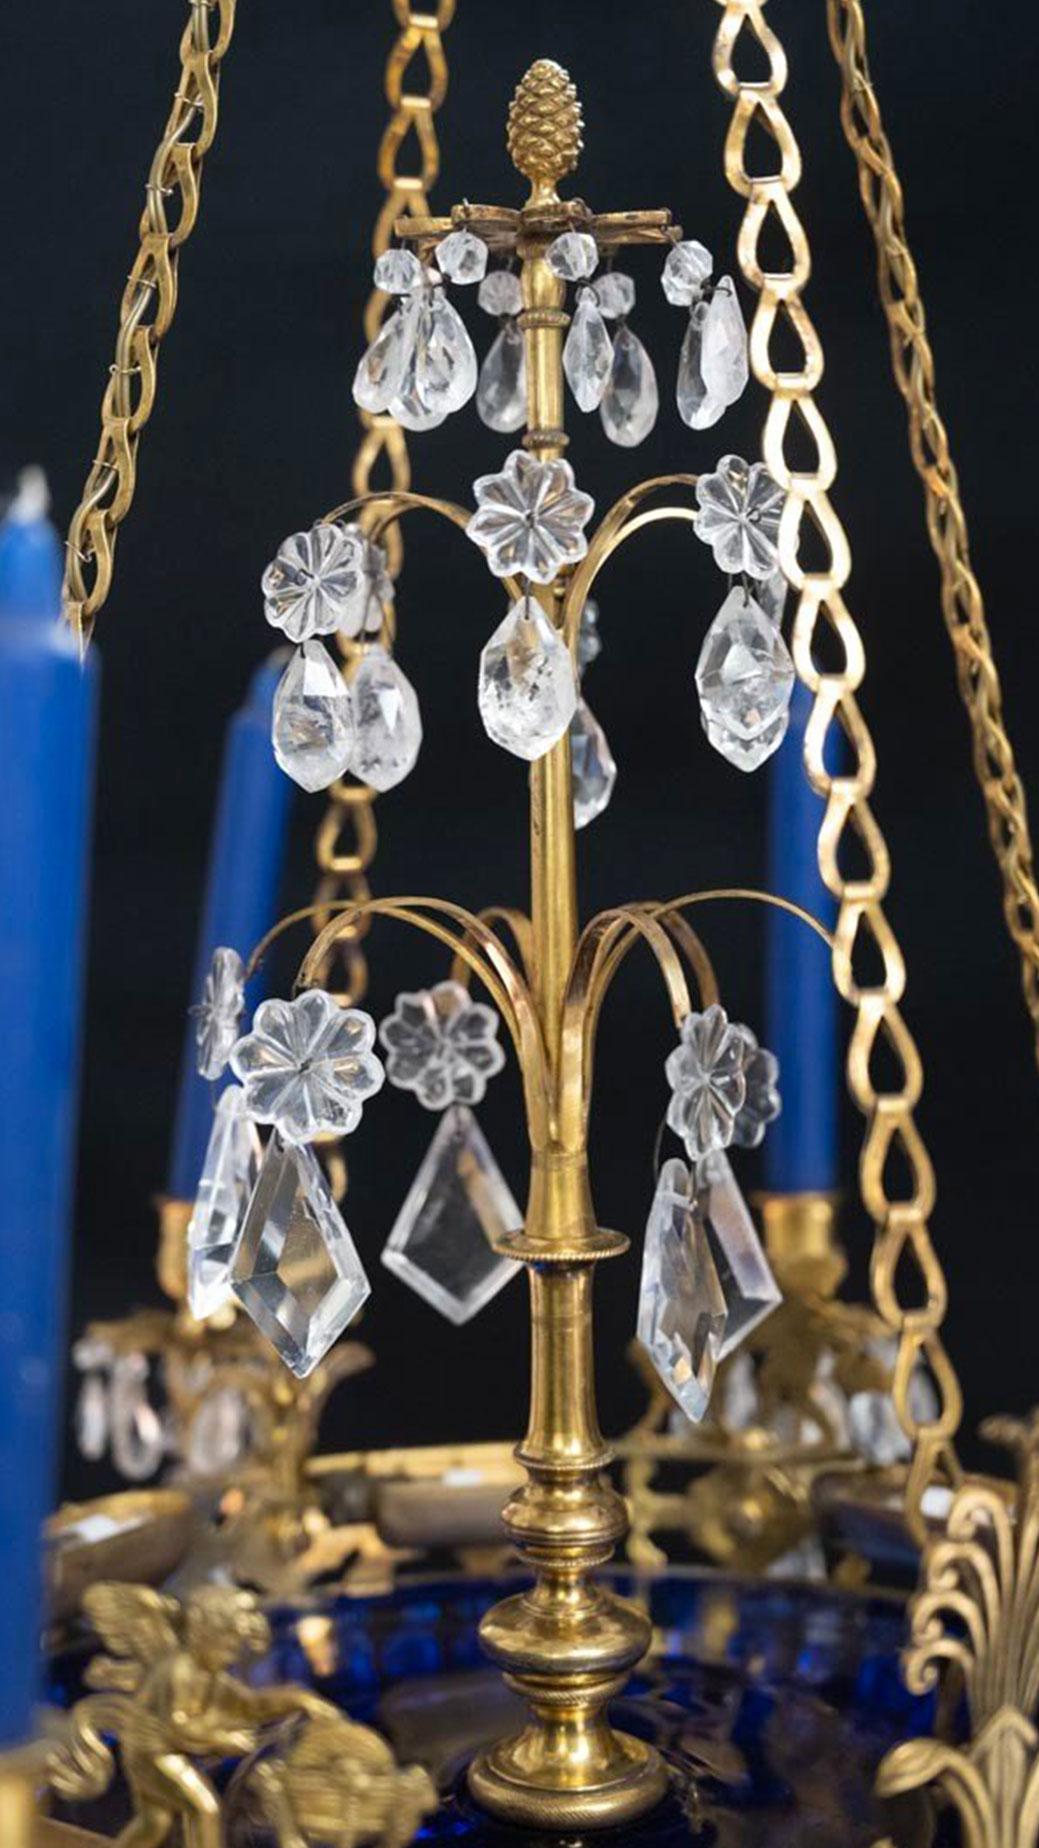 Very elegant cristal rock  and blue glass chandelier, from Sweden. 
Around 1820, in the Empire style.